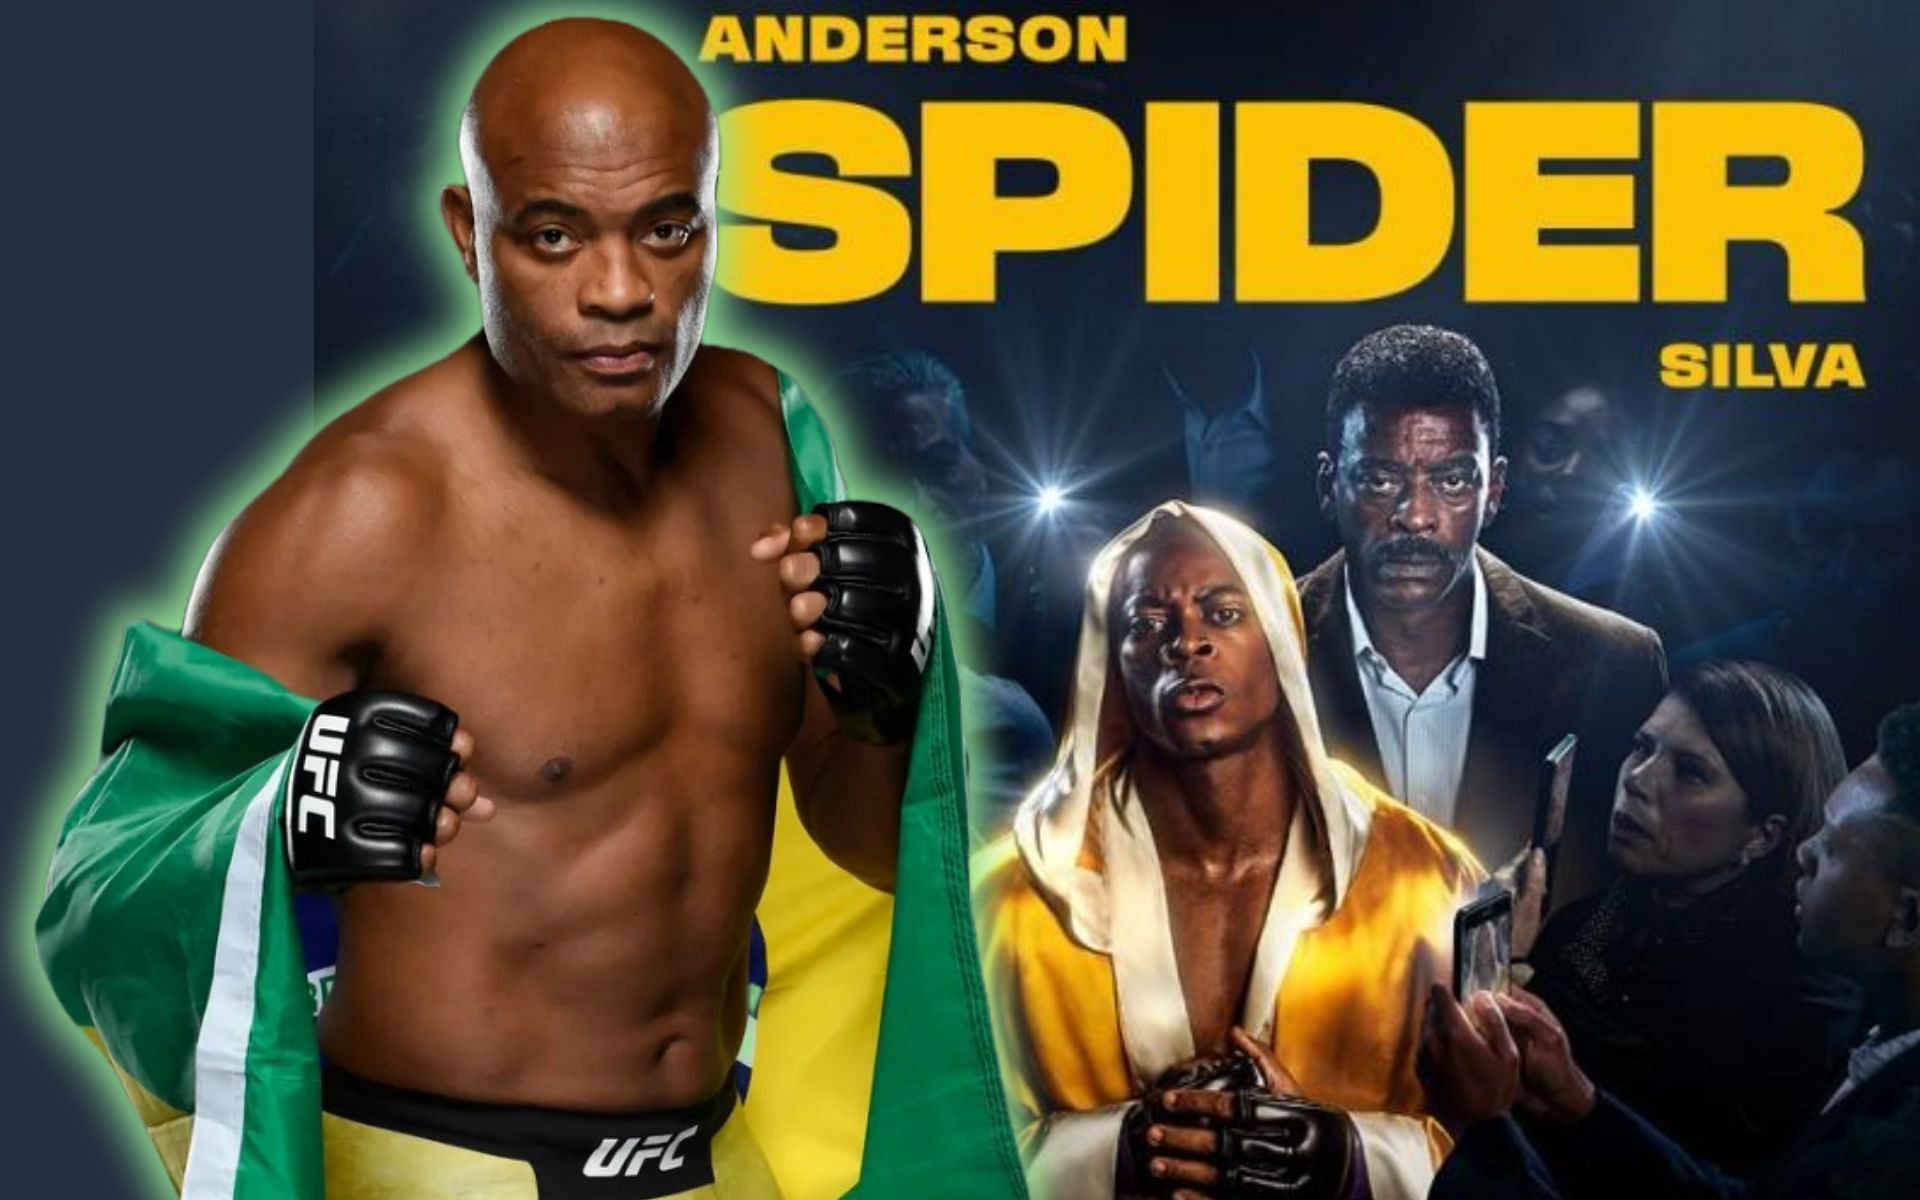 PARAMOUNT+ reveals new teaser for biographical series ANDERSON SPIDER SILVA  - TV Blackbox